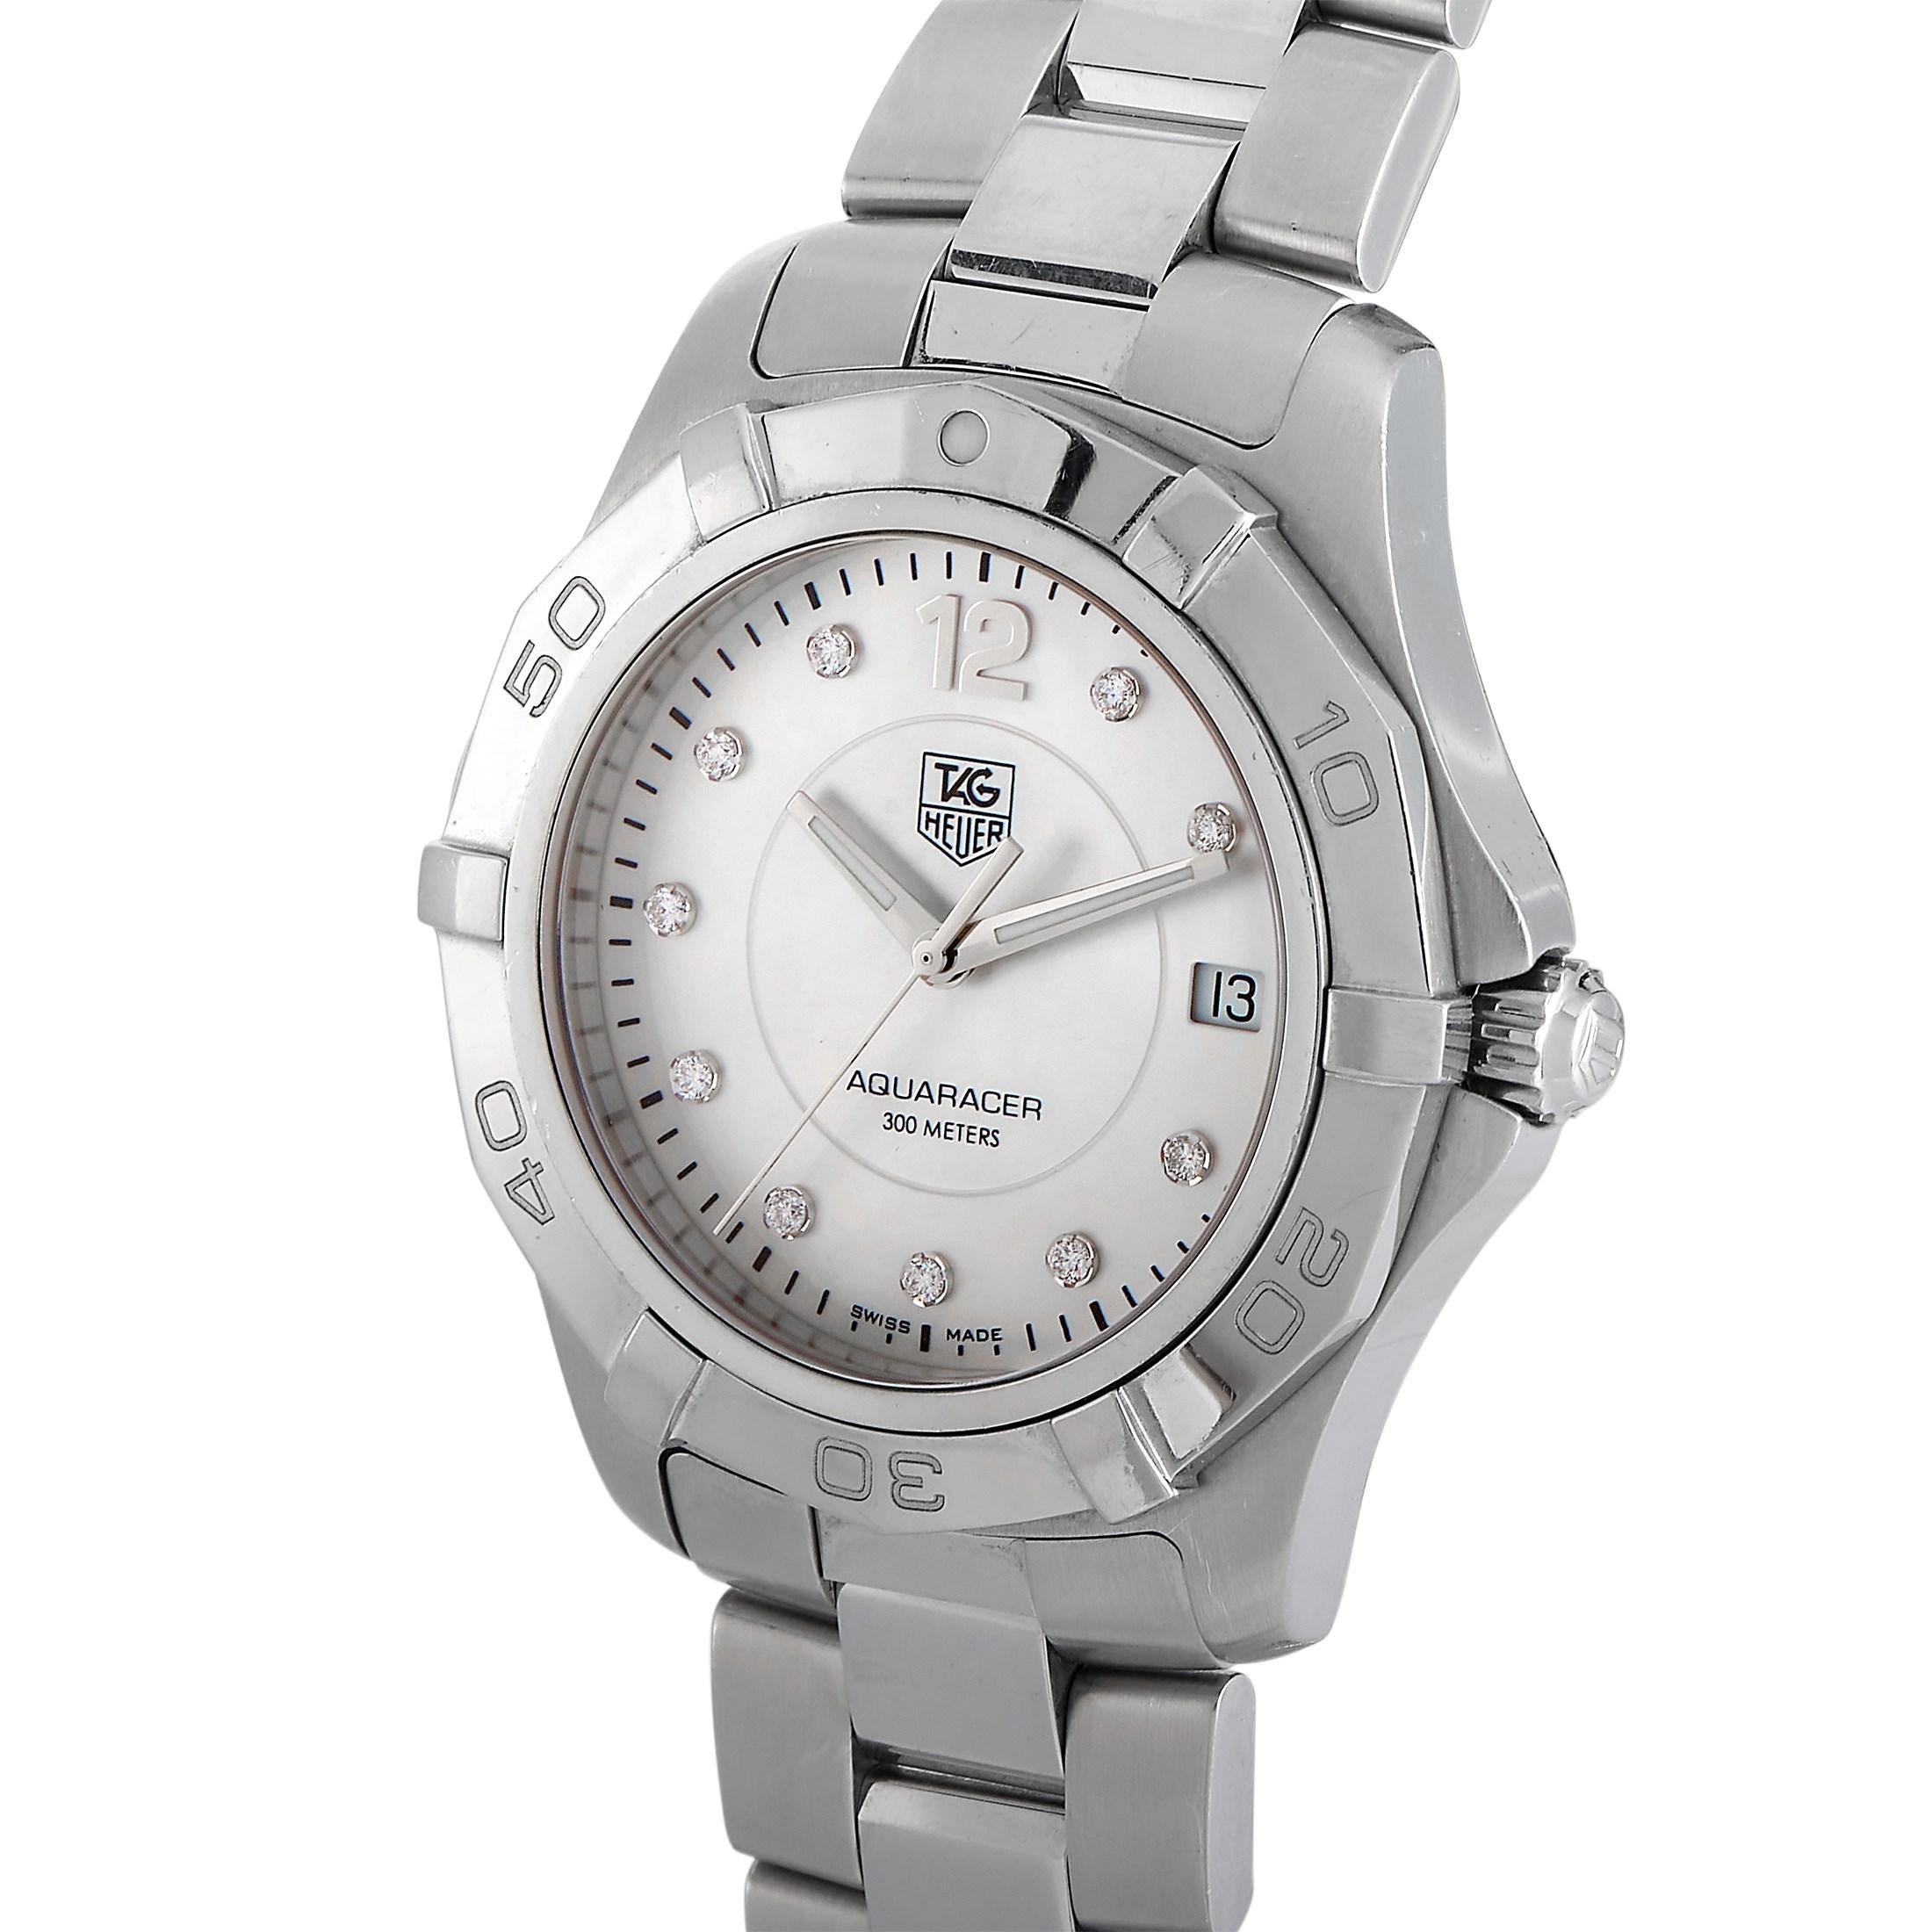 The Tag Heuer Aquaracer Watch, reference number WAF115.BA0810, is the definition of contemporary elegance. 

This stylish timepiece comes to life thanks to the 38mm case, fixed bezel, and bracelet crafted from shimmering stainless steel. A white